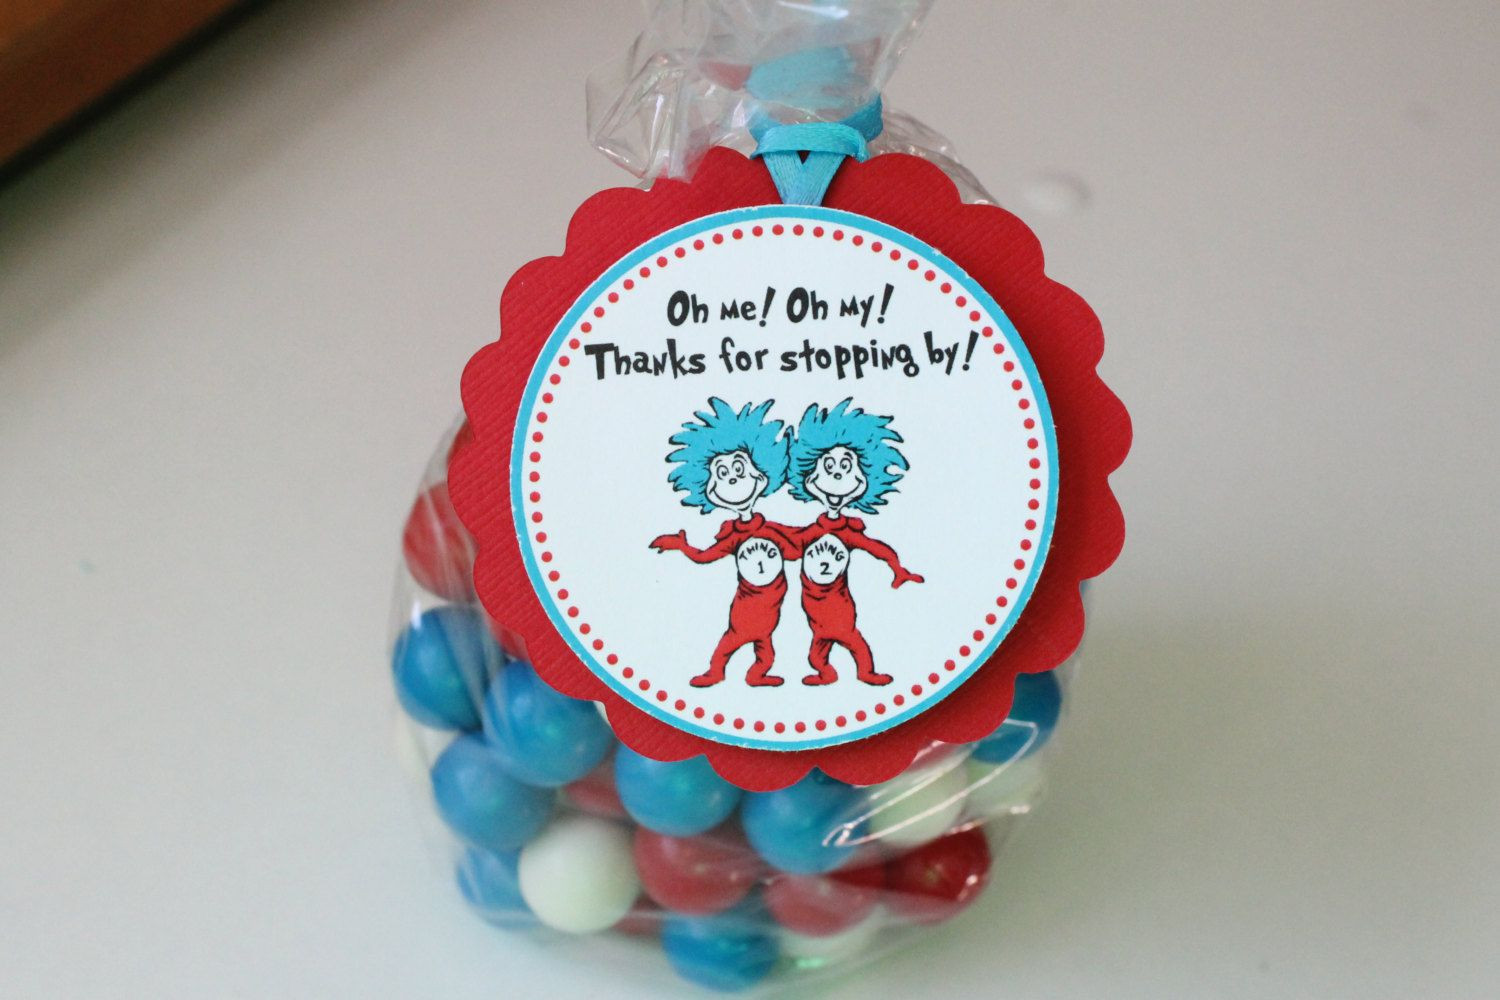 Twins Baby Shower Party Favors
 Thing 1 & Thing 2 Twin Baby Shower Party favor idea